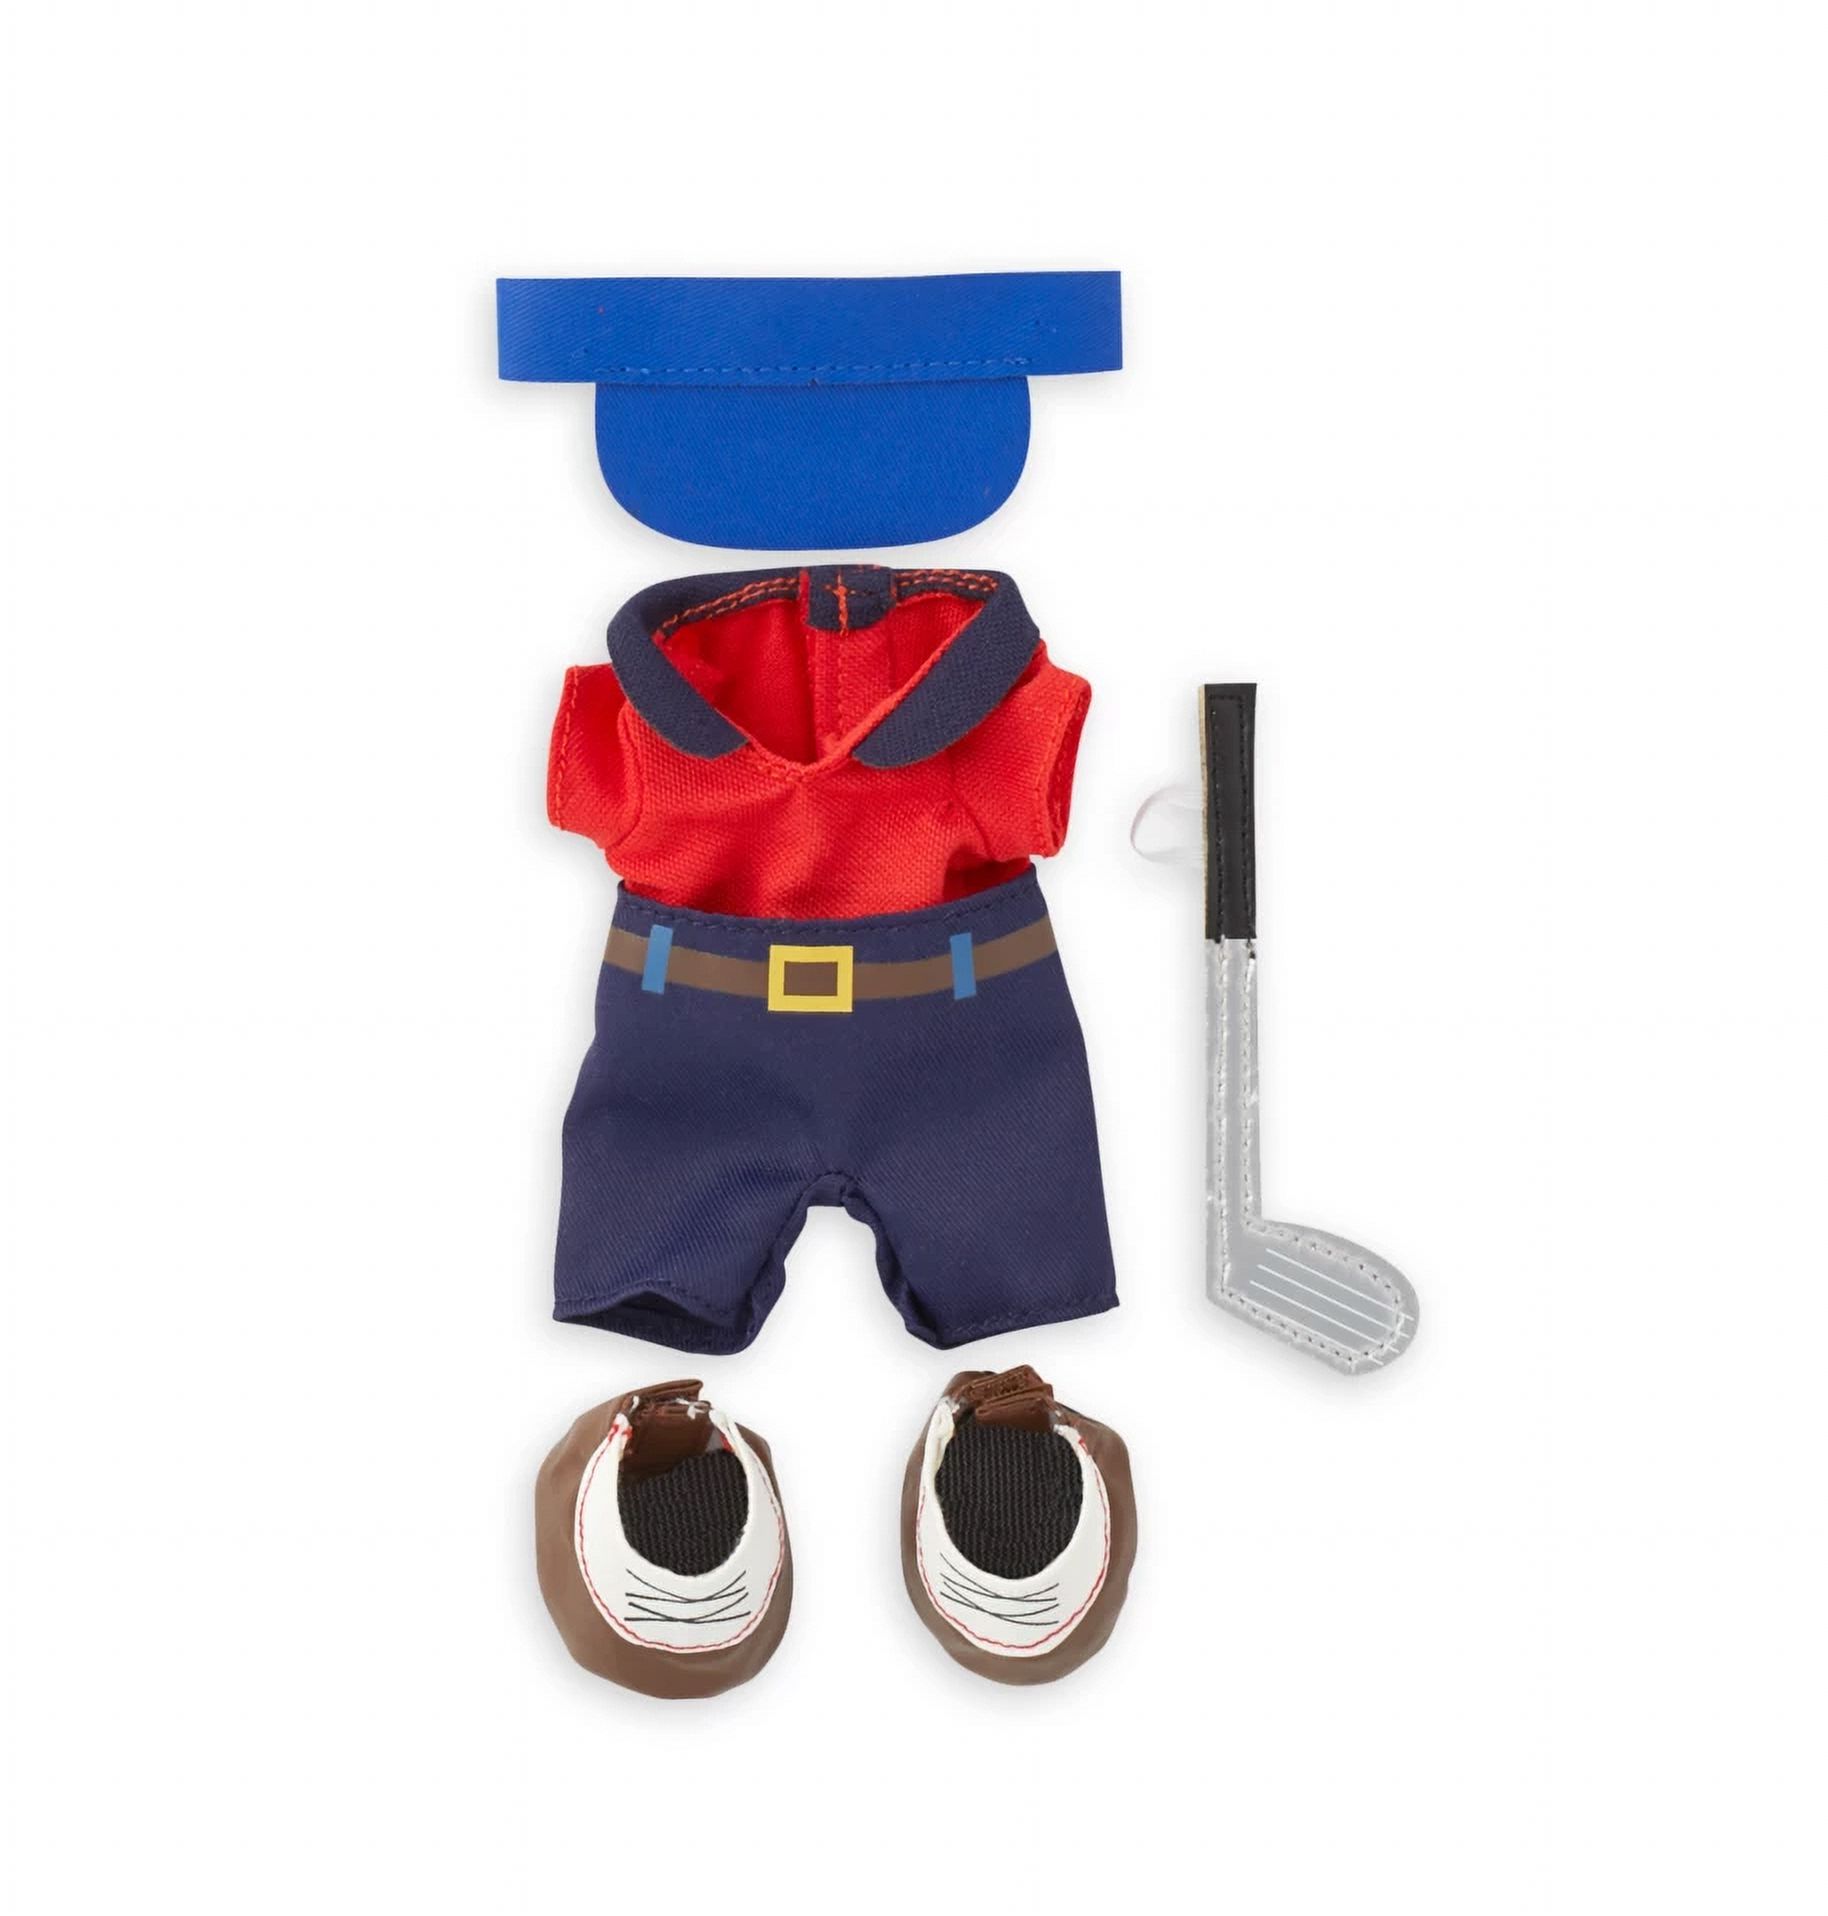 Disney NuiMOs Golf Outfit with Pants New with Card - image 2 of 3